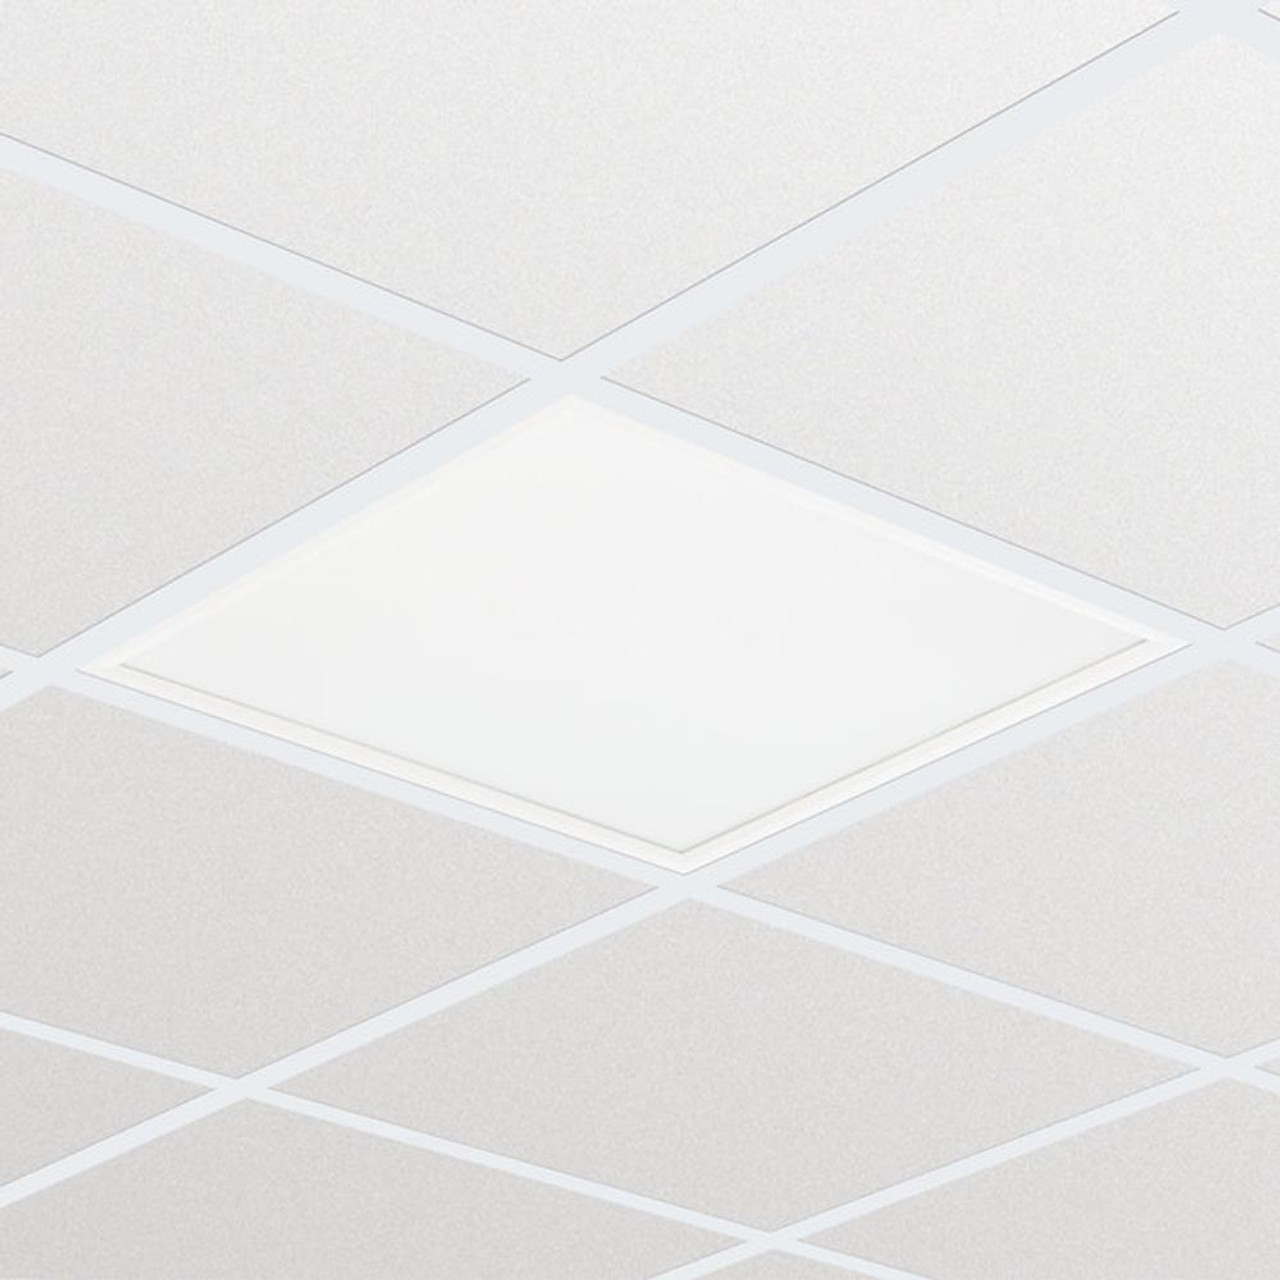 CoreLine 2ft x 2ft LED Panel Cool White 29W 3600lm Recessed UGR<19